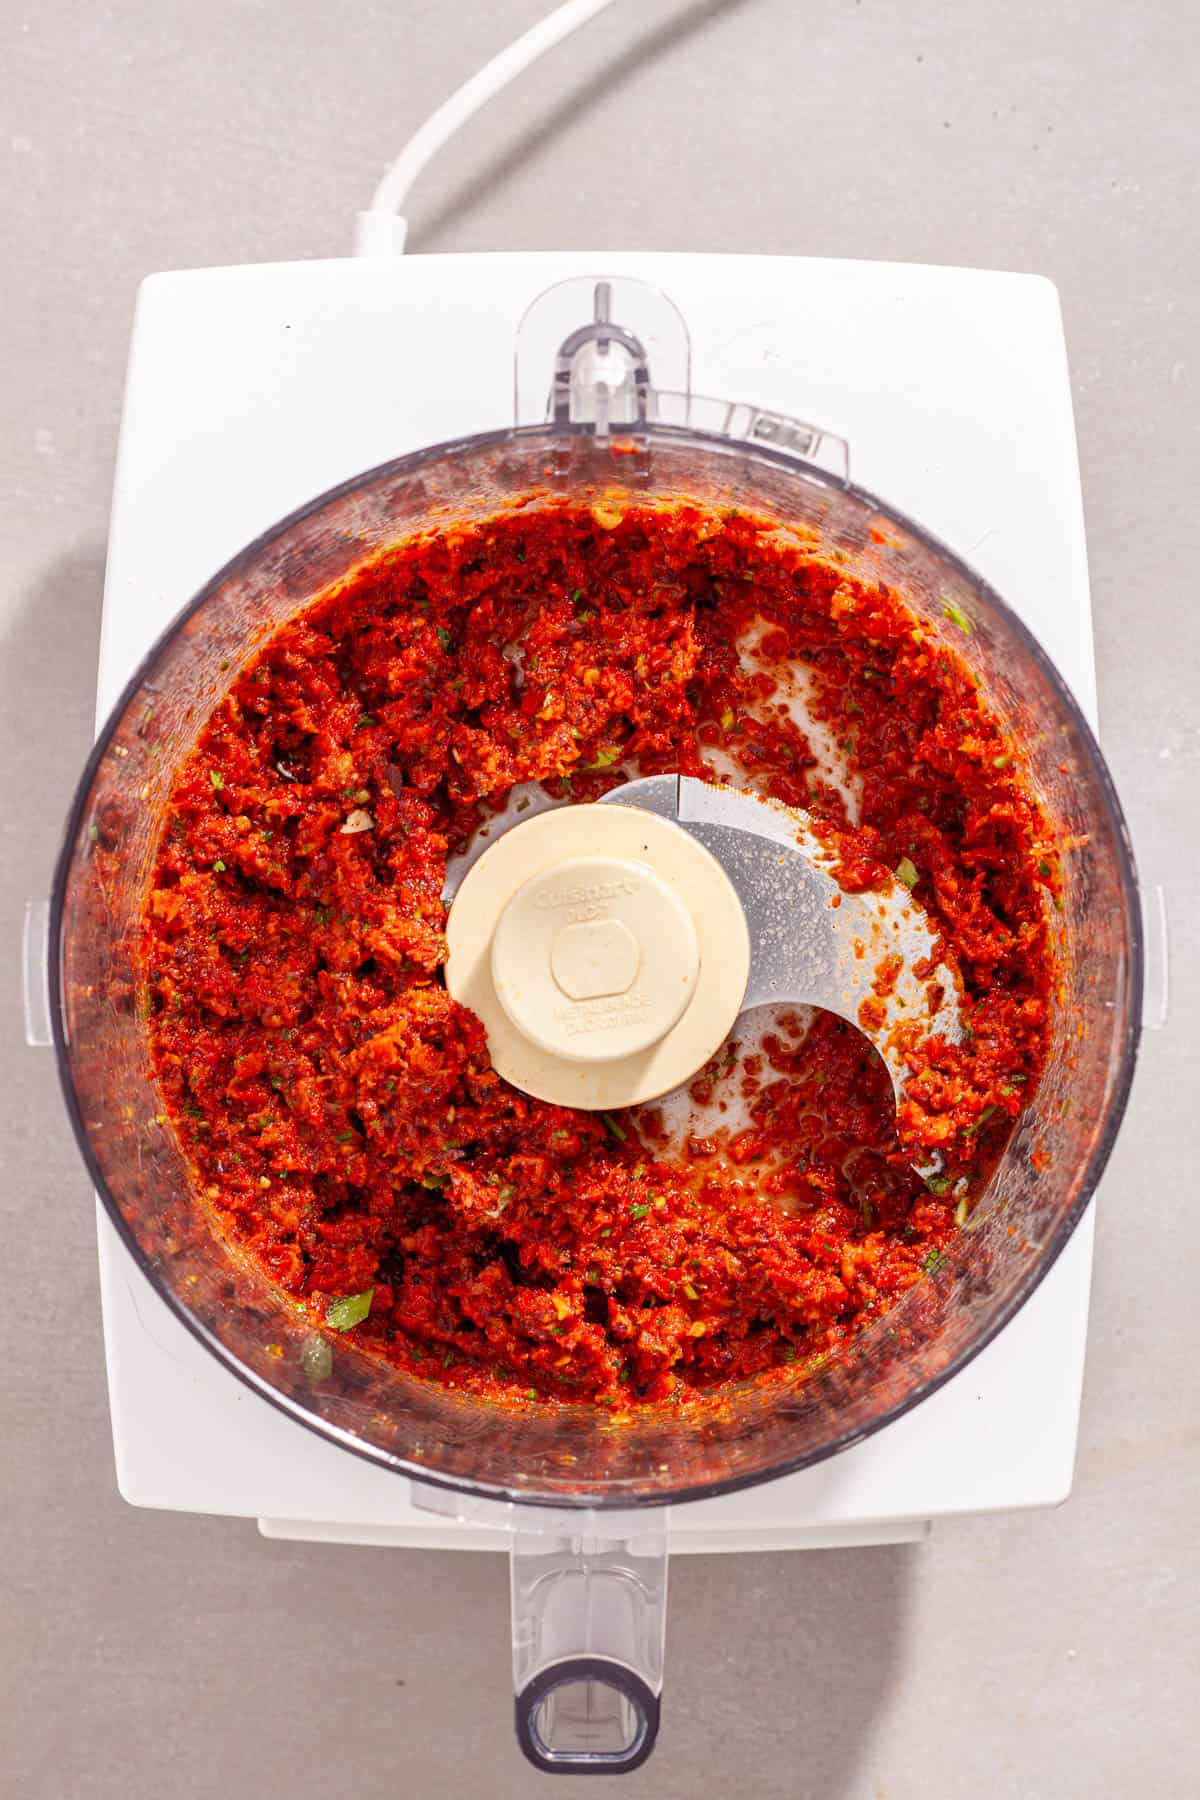 Homemade sun-dried tomato spread in a food processor blended to a paste.